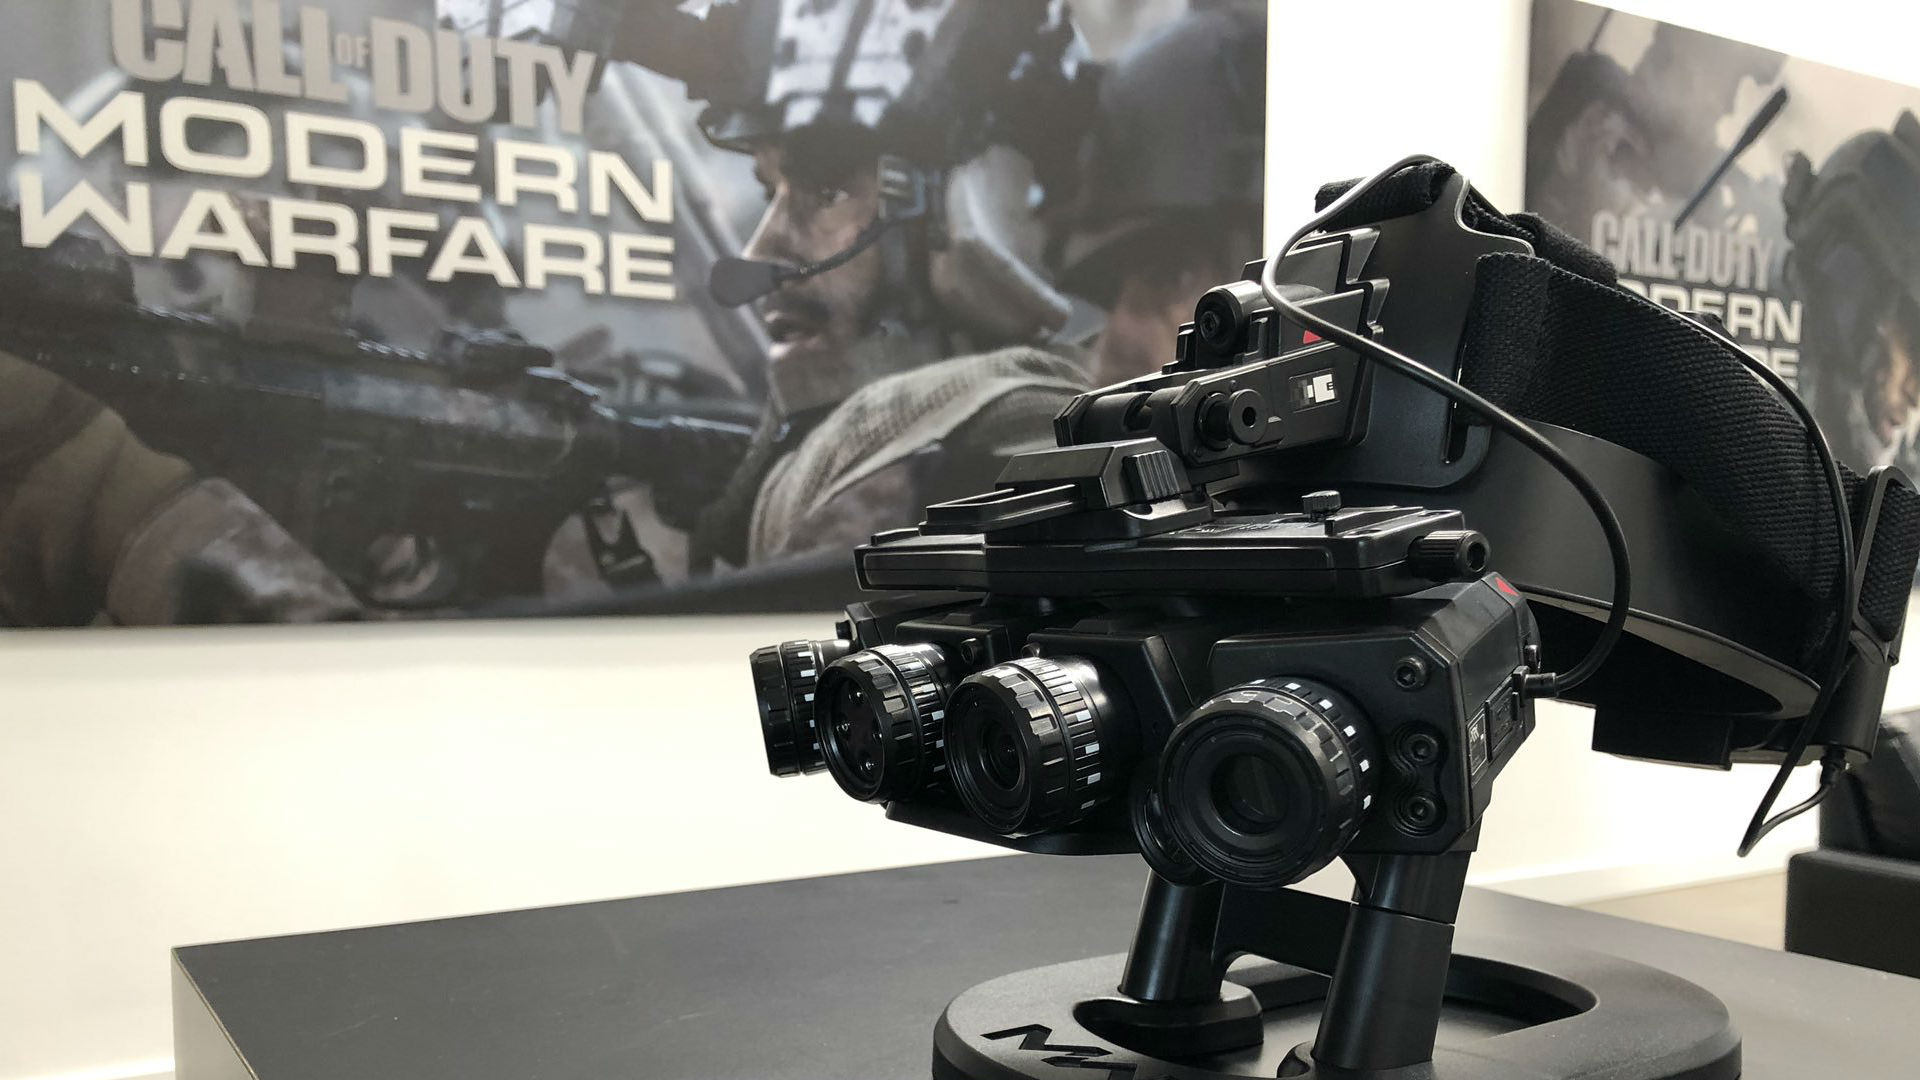 The Modern Warfare Dark Edition night vision goggles are a sight to behold in new official image